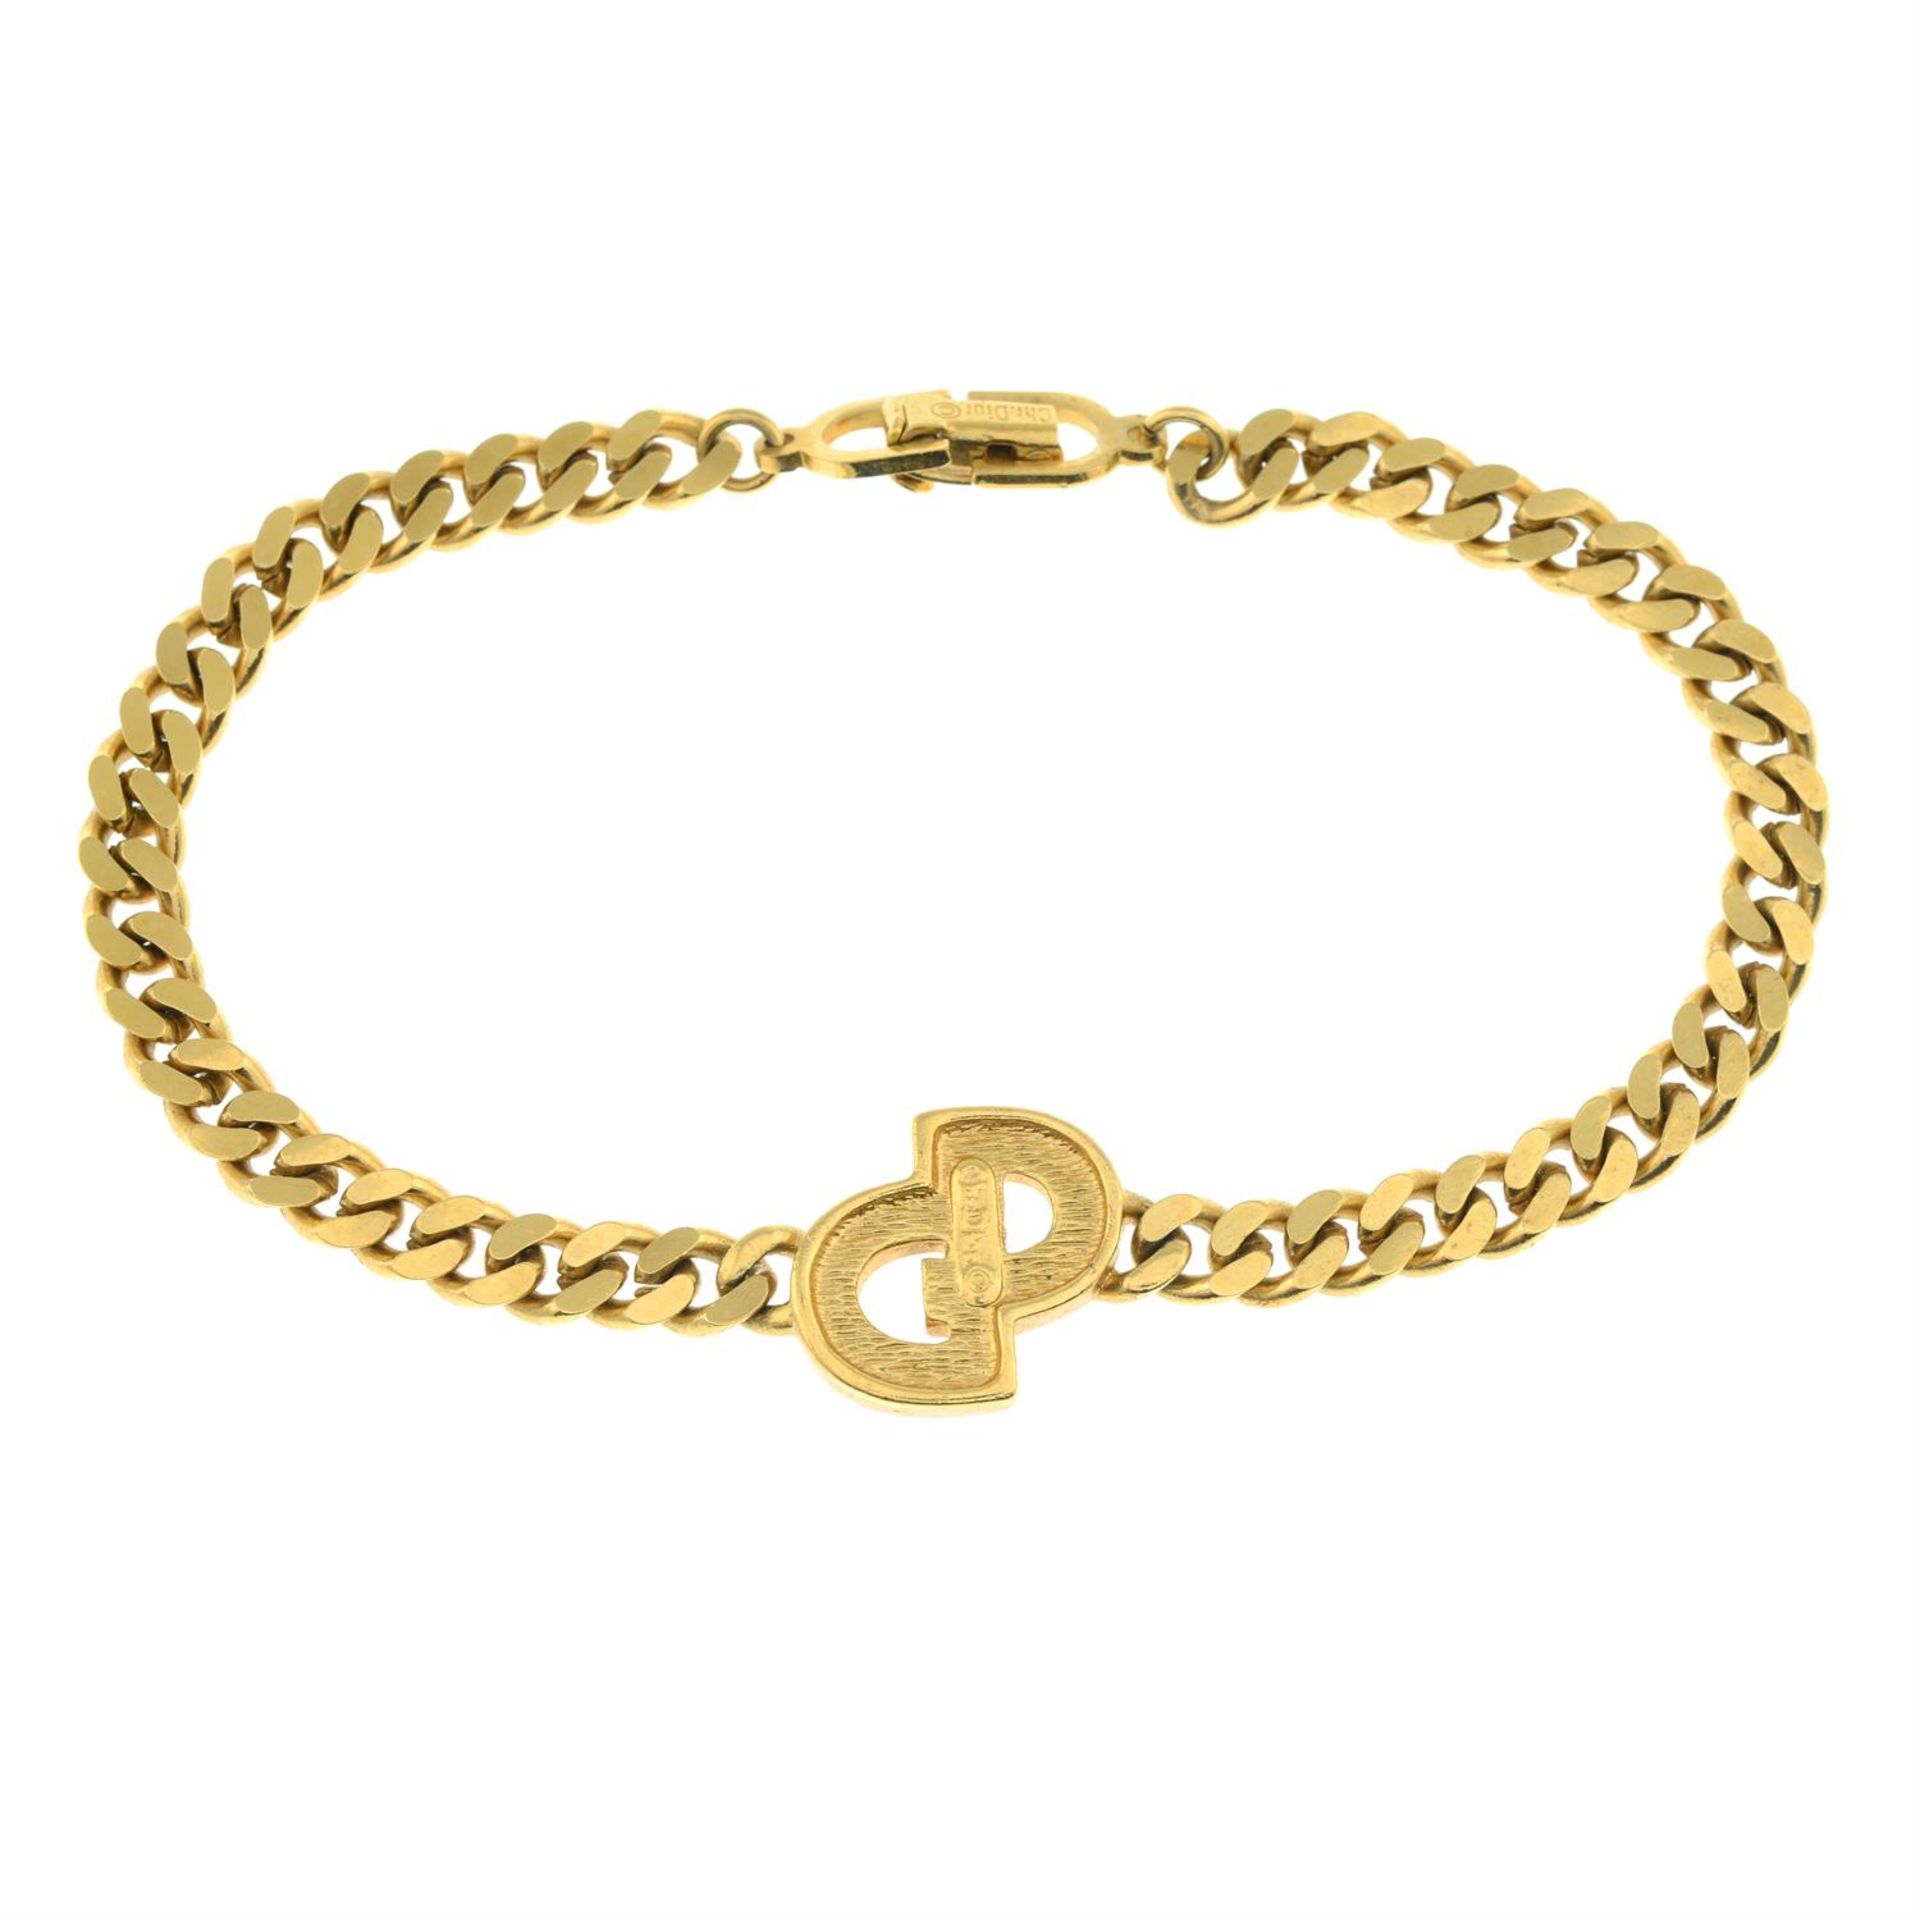 CHRISTIAN DIOR - a chain and paste set bracelet. - Image 2 of 2